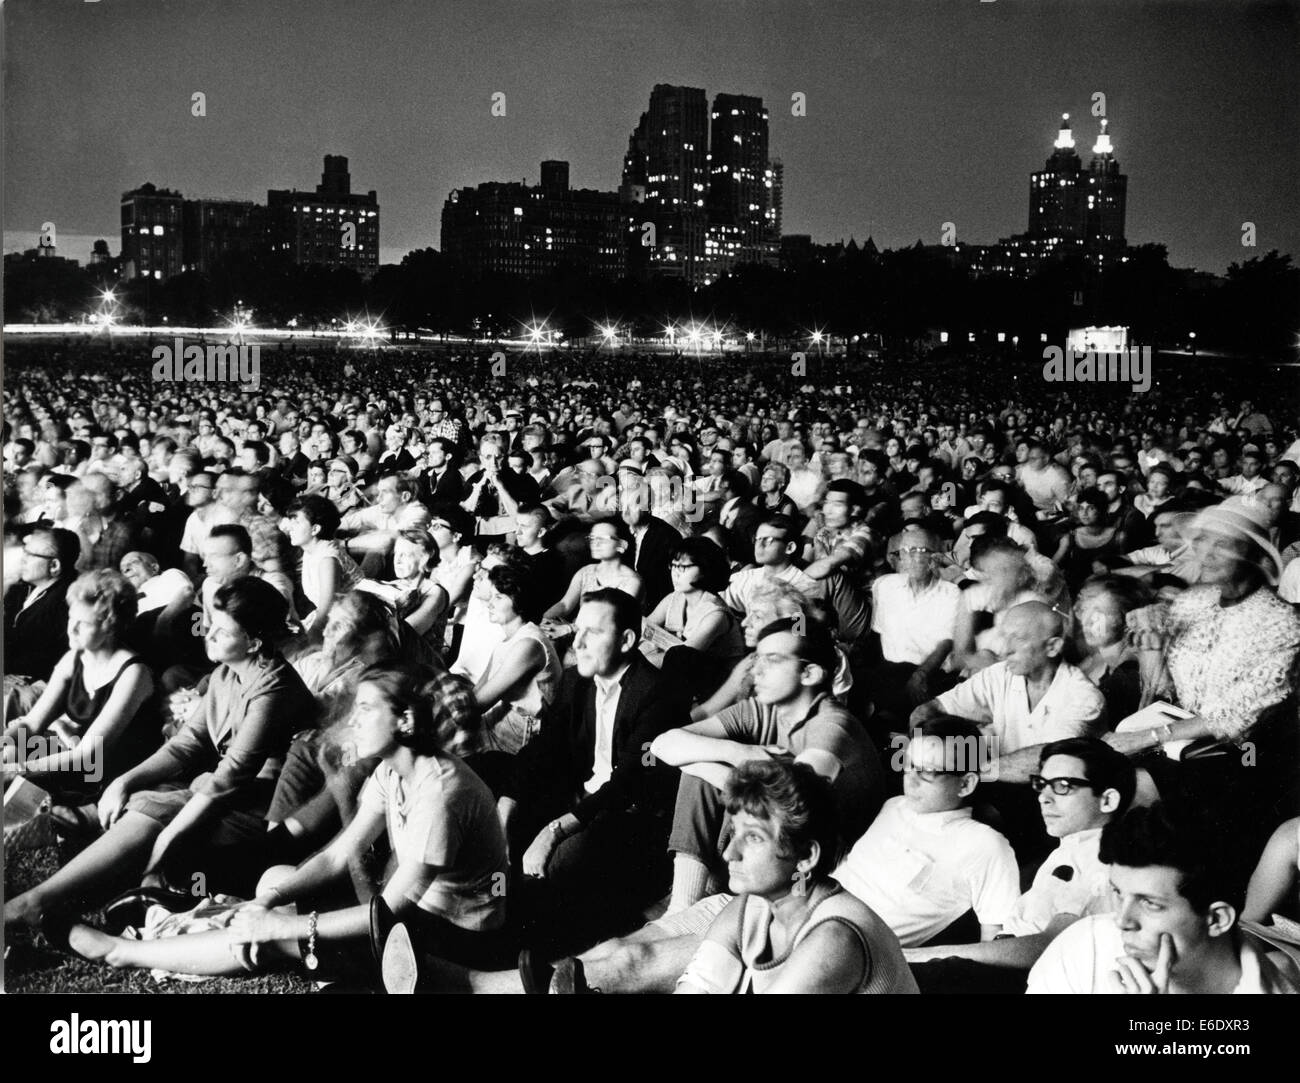 Large Crowd Listening to Classical Music Performed by New York Philharmonic Orchestra at Night, Central Park, New York City, Stock Photo